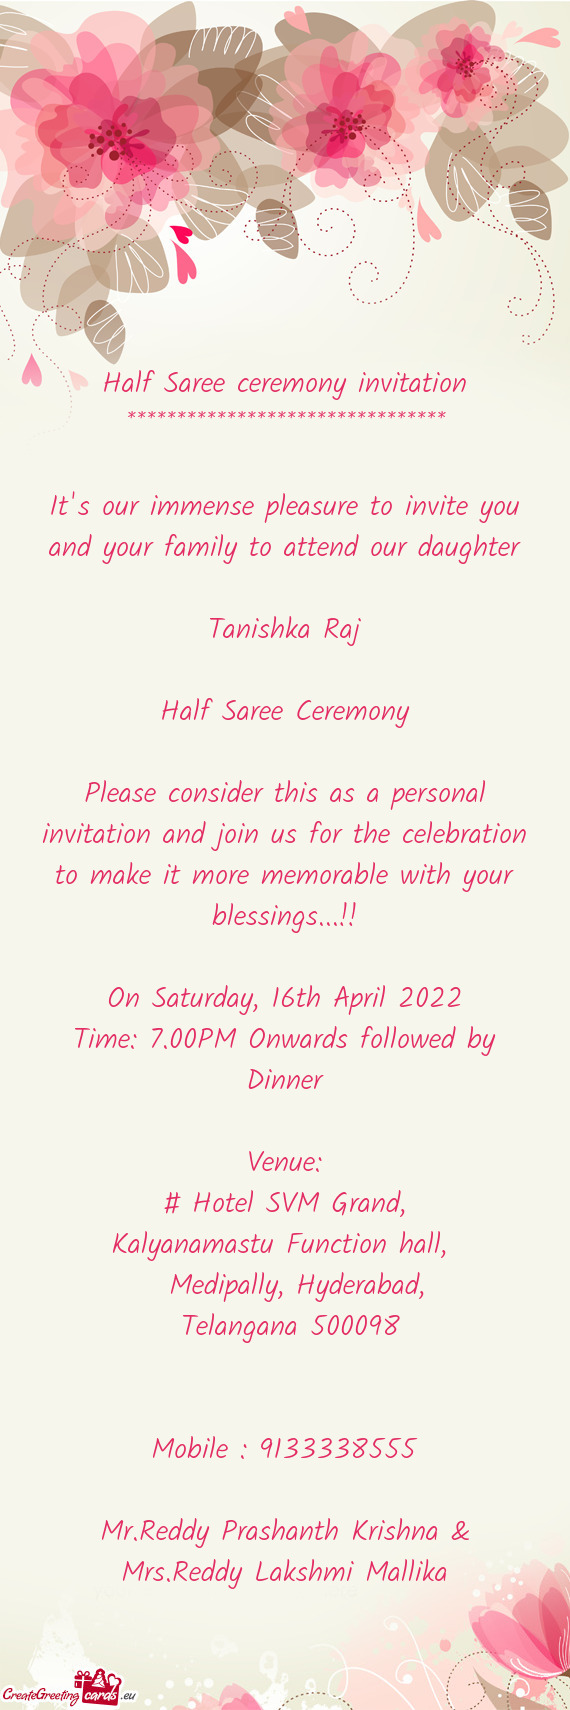 Nsider this as a personal invitation and join us for the celebration to make it more memorable with